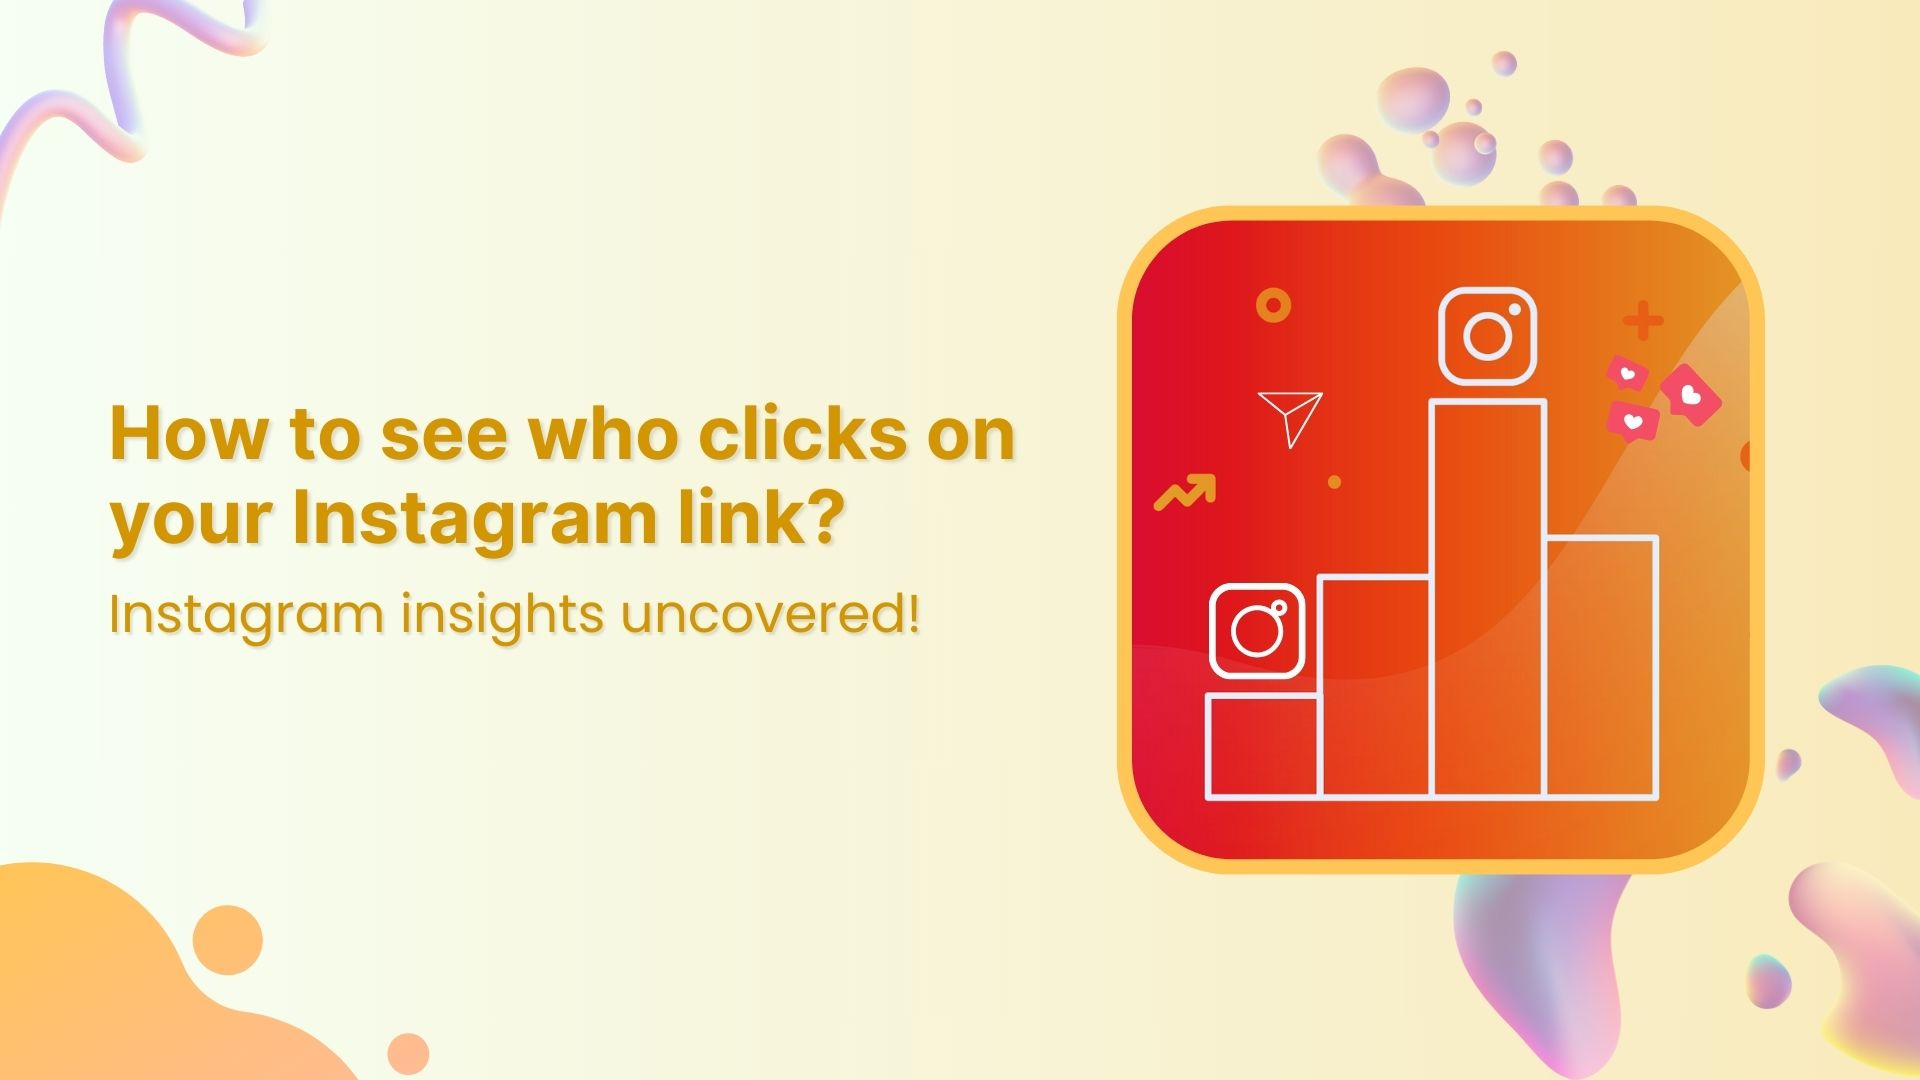 How to see who clicks on your Instagram link